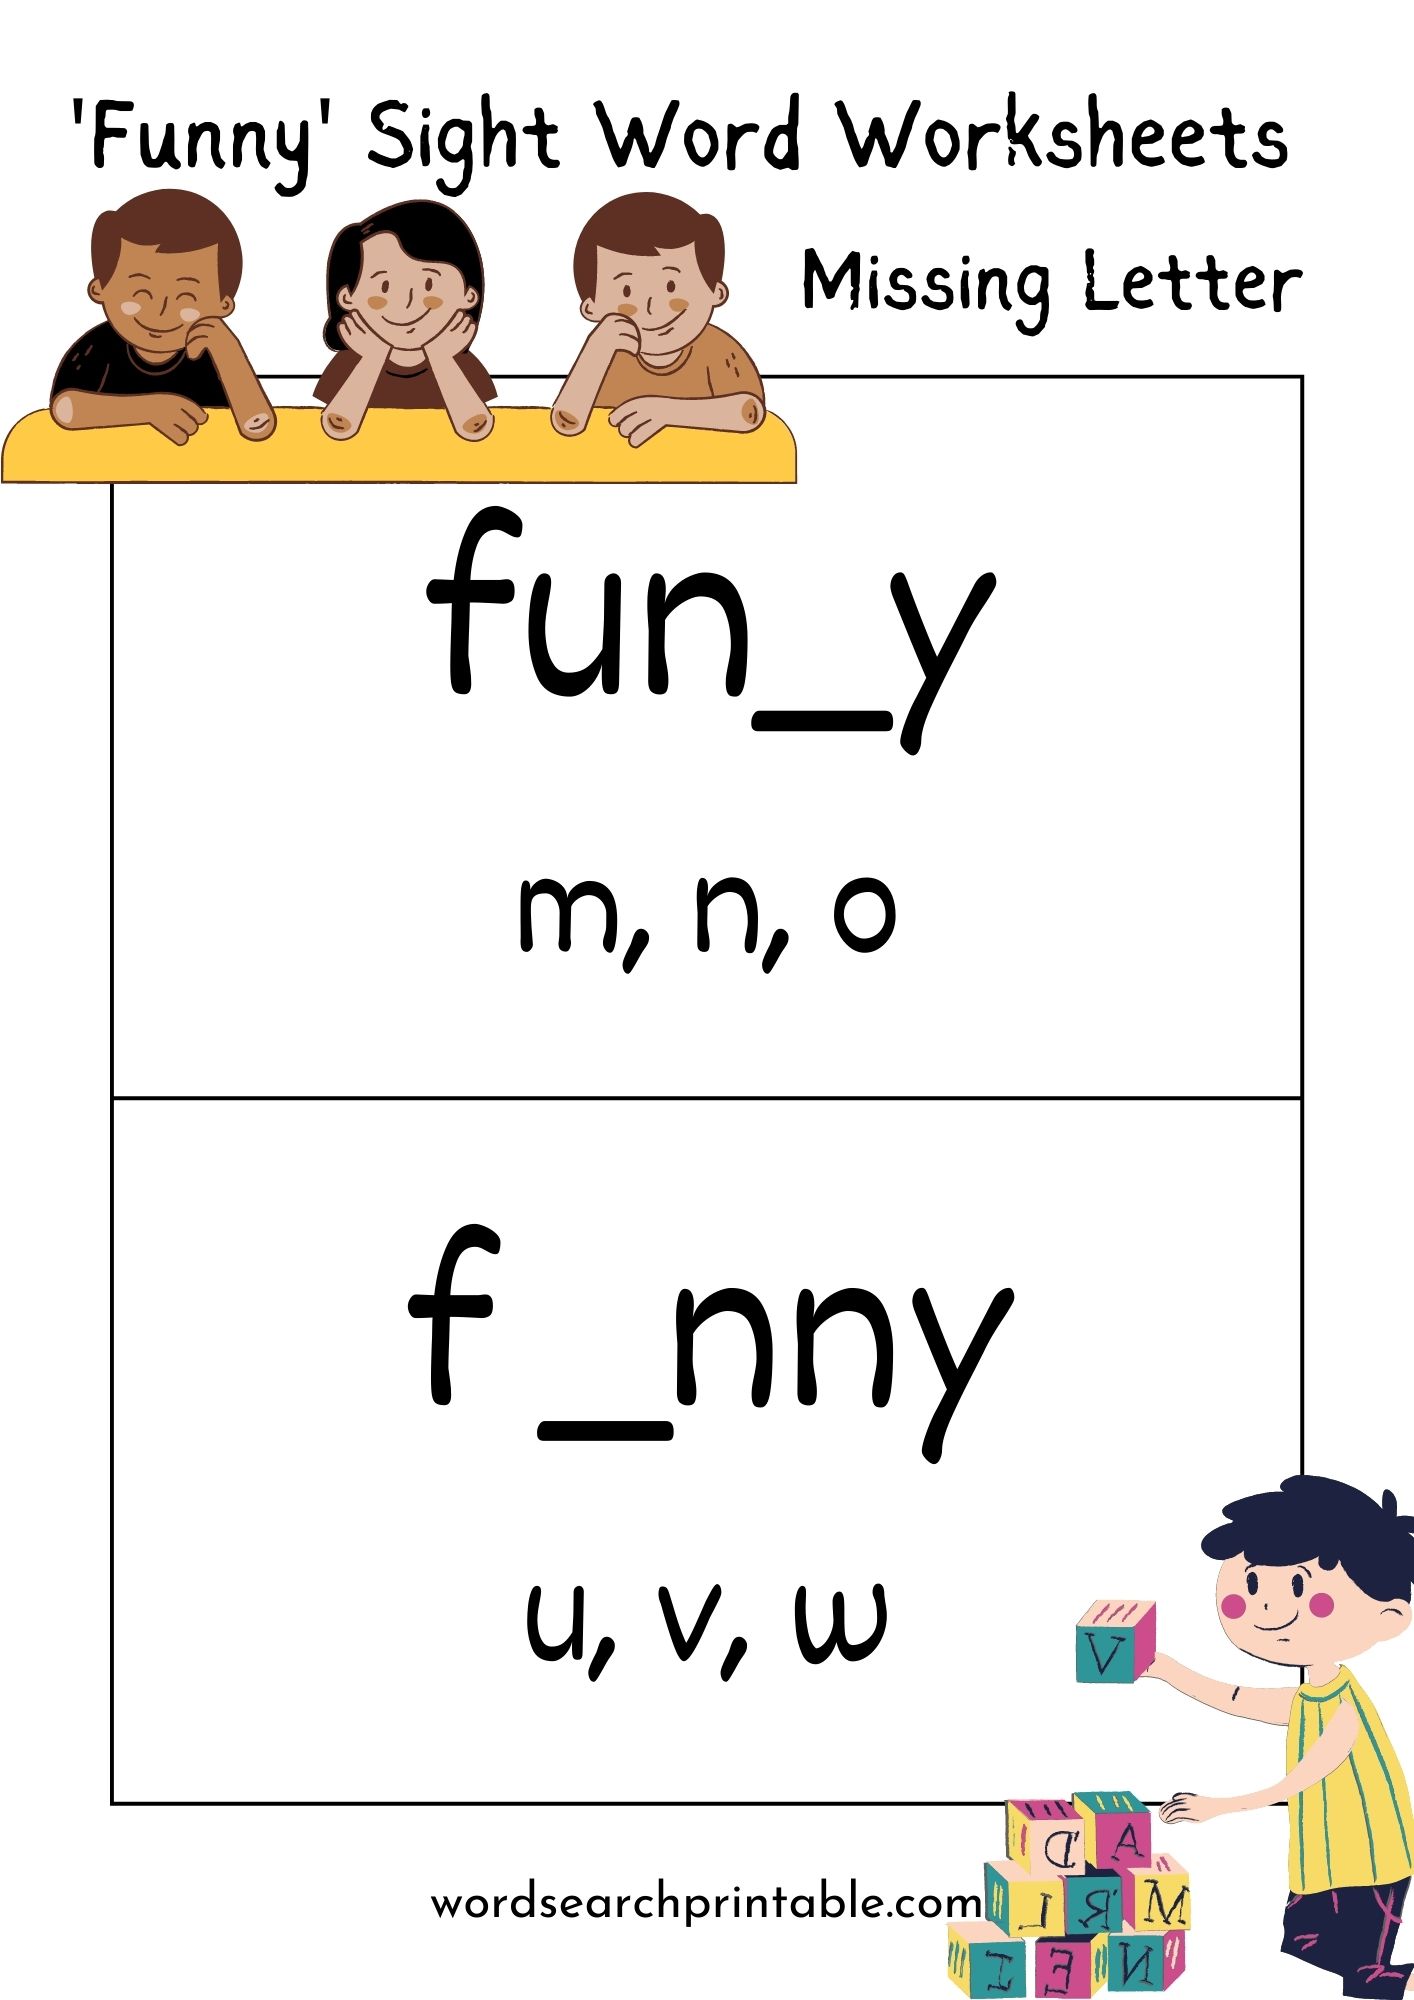 Find the Missing Letter of the sight word Funny